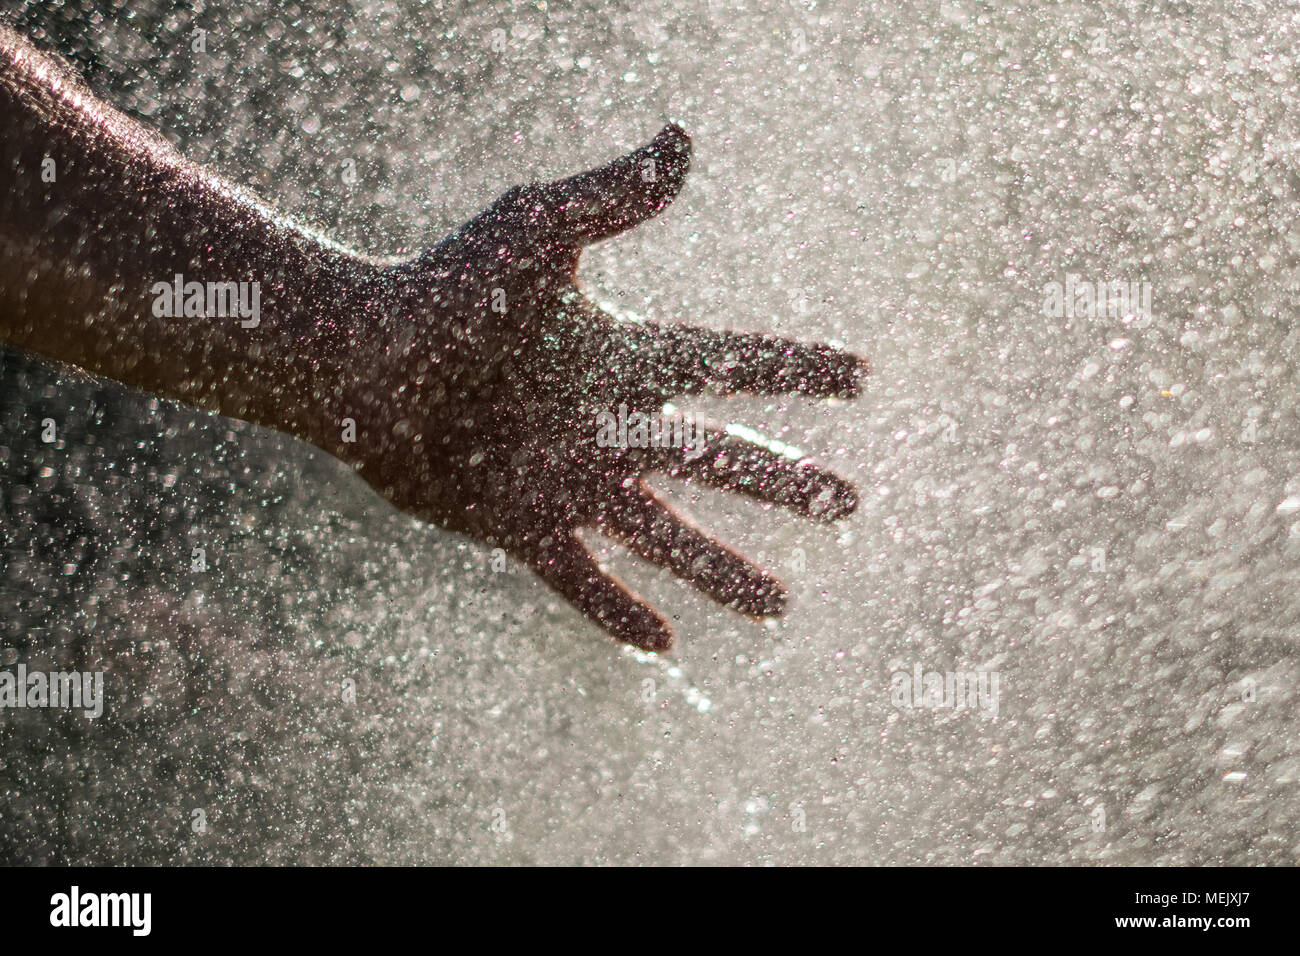 Water drops and hand - holding hand in water splash Stock Photo